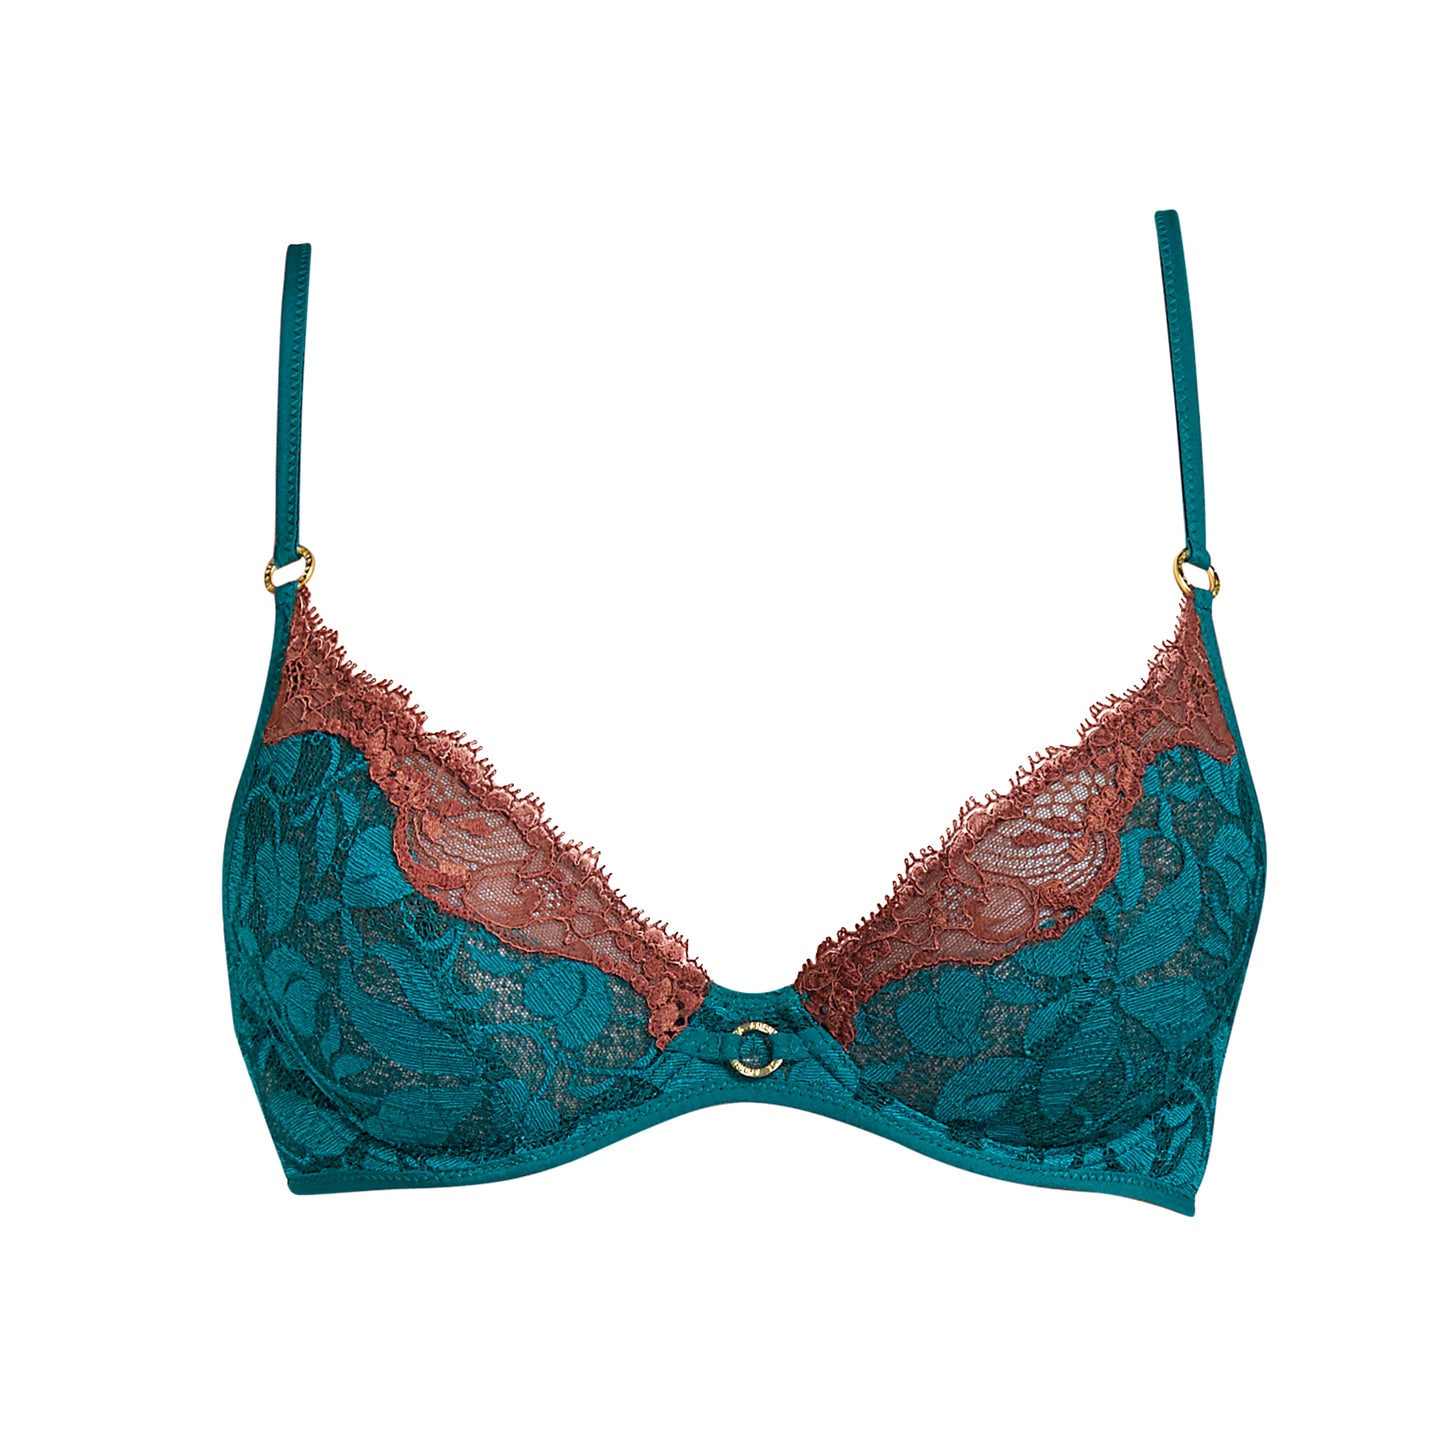 Andres Sarda Janis volle cup bh Jasper Green